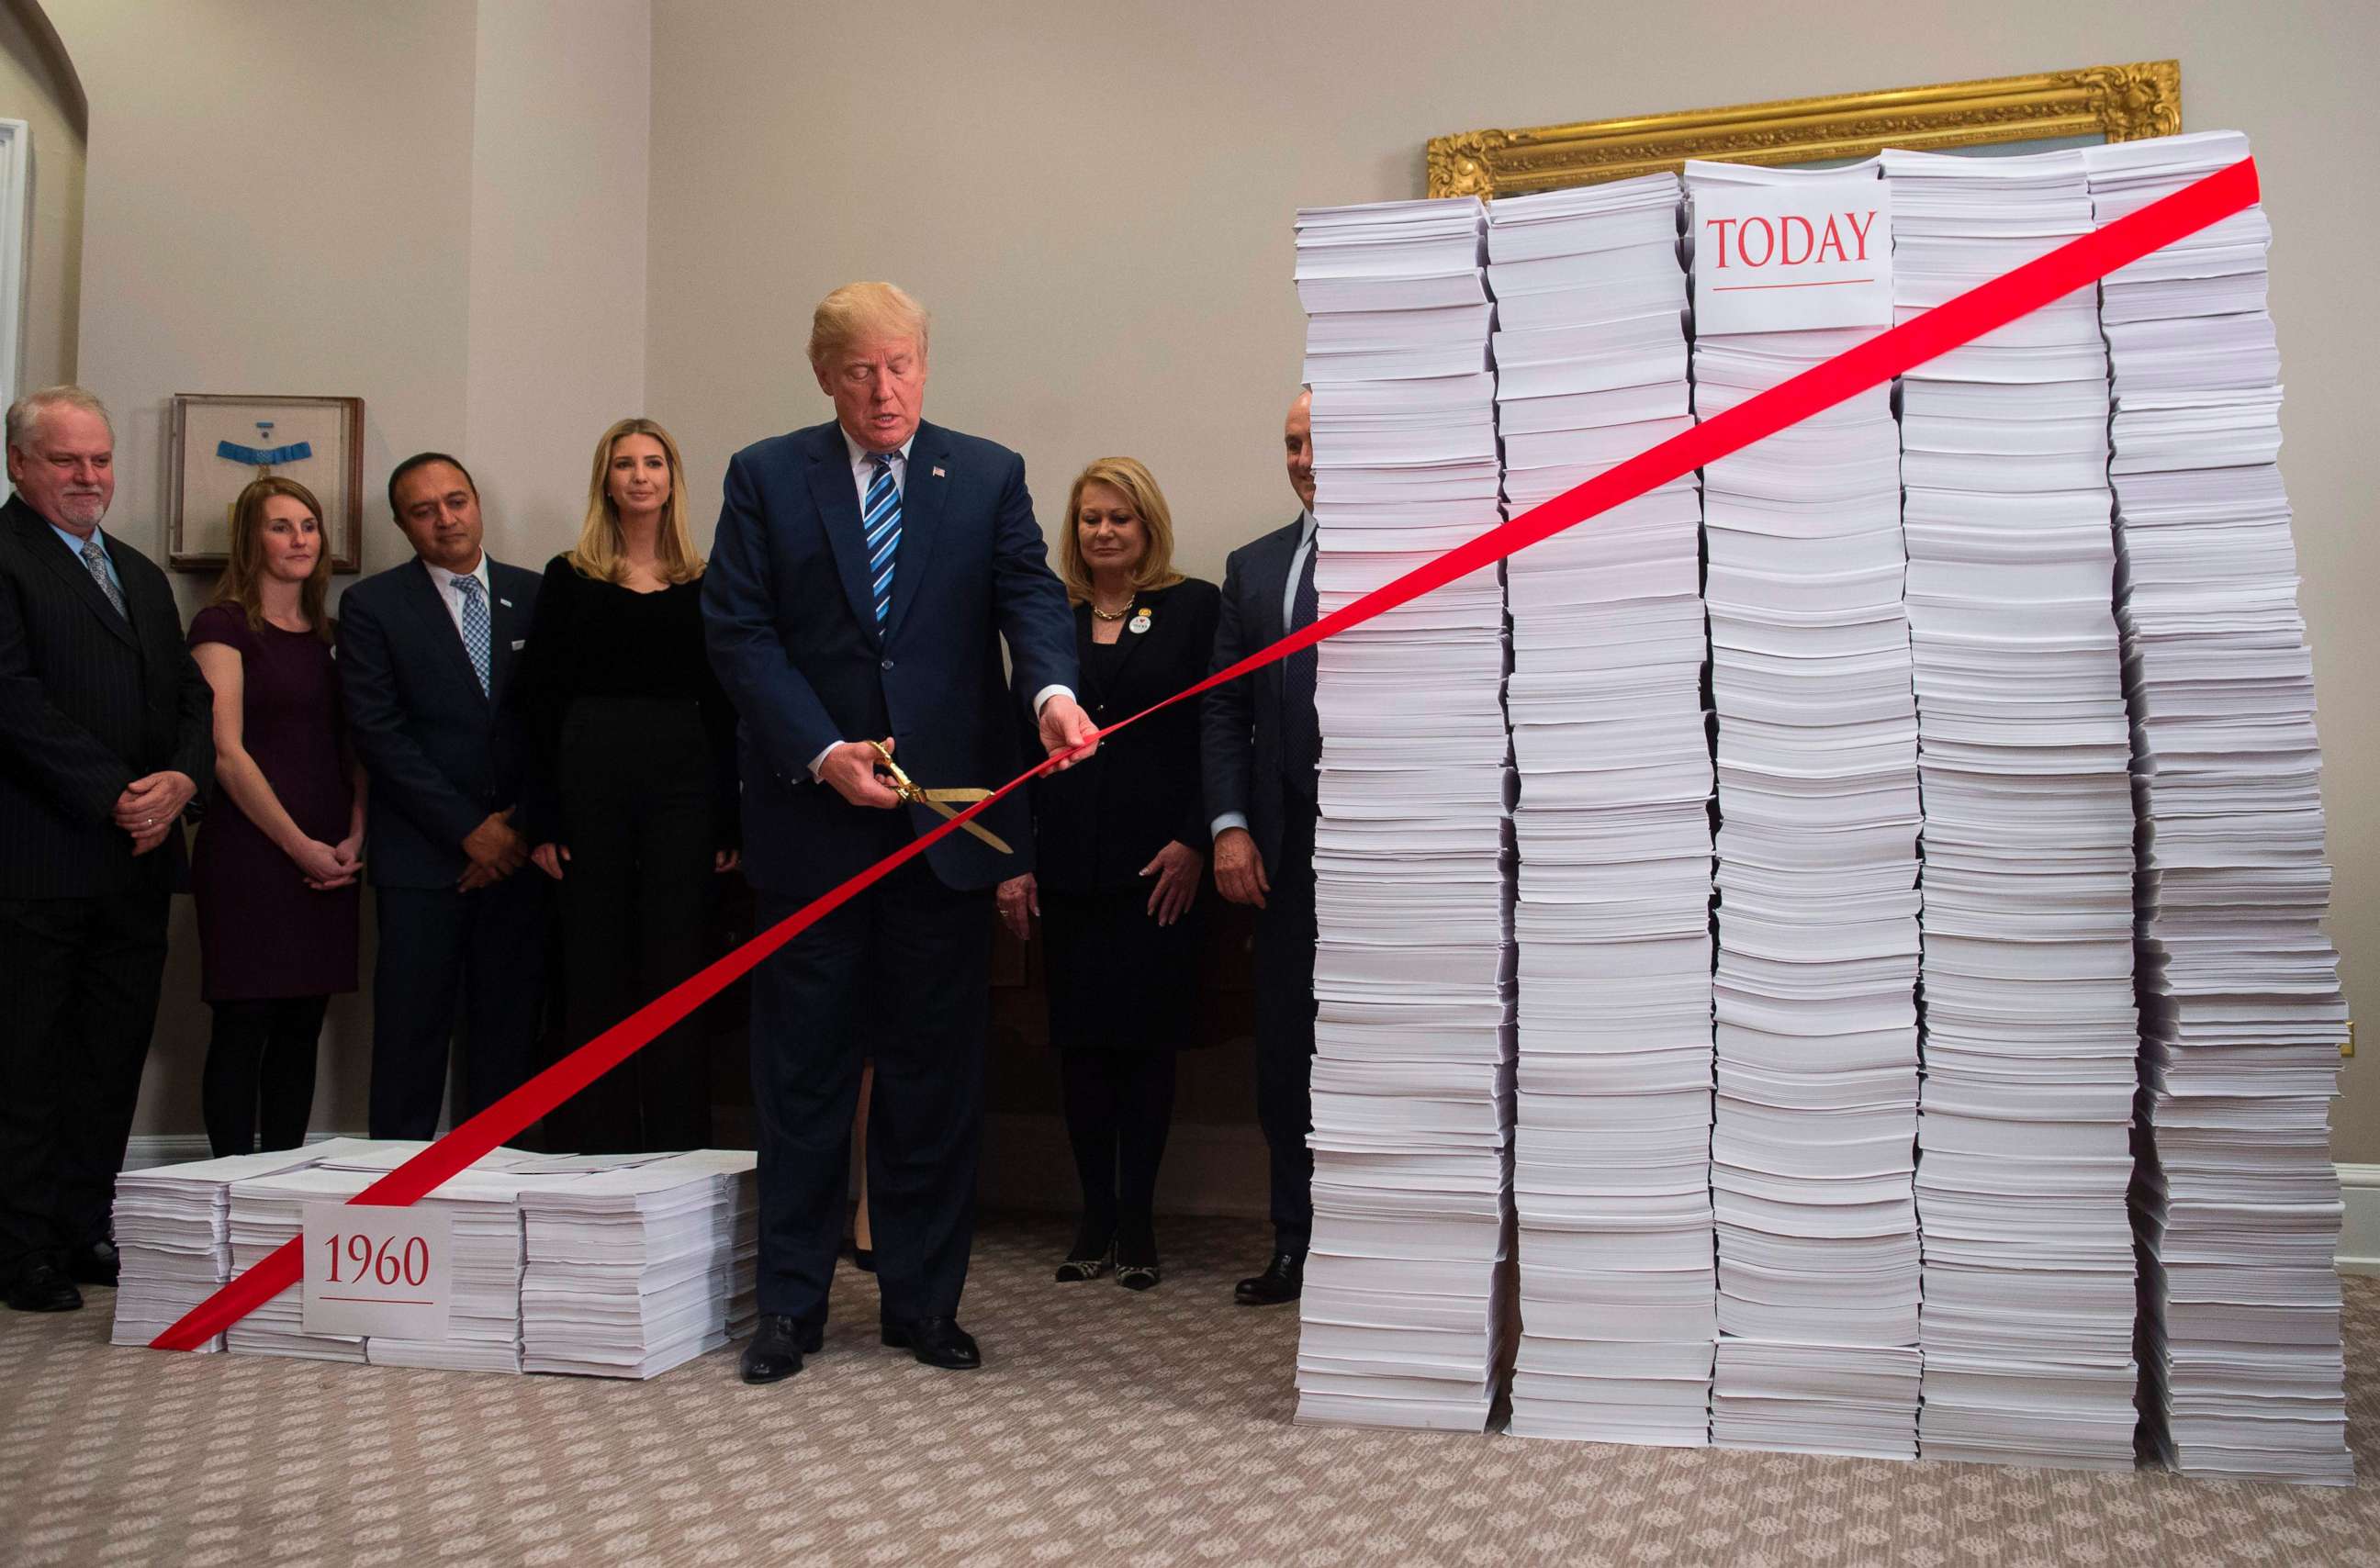 PHOTO: President Donald Trump uses scissors to cut a red tape tied between stacks of papers representing government regulations of the 1960s and today after he spoke about his efforts in deregulation in the White House in Washington, Dec. 14, 2017.